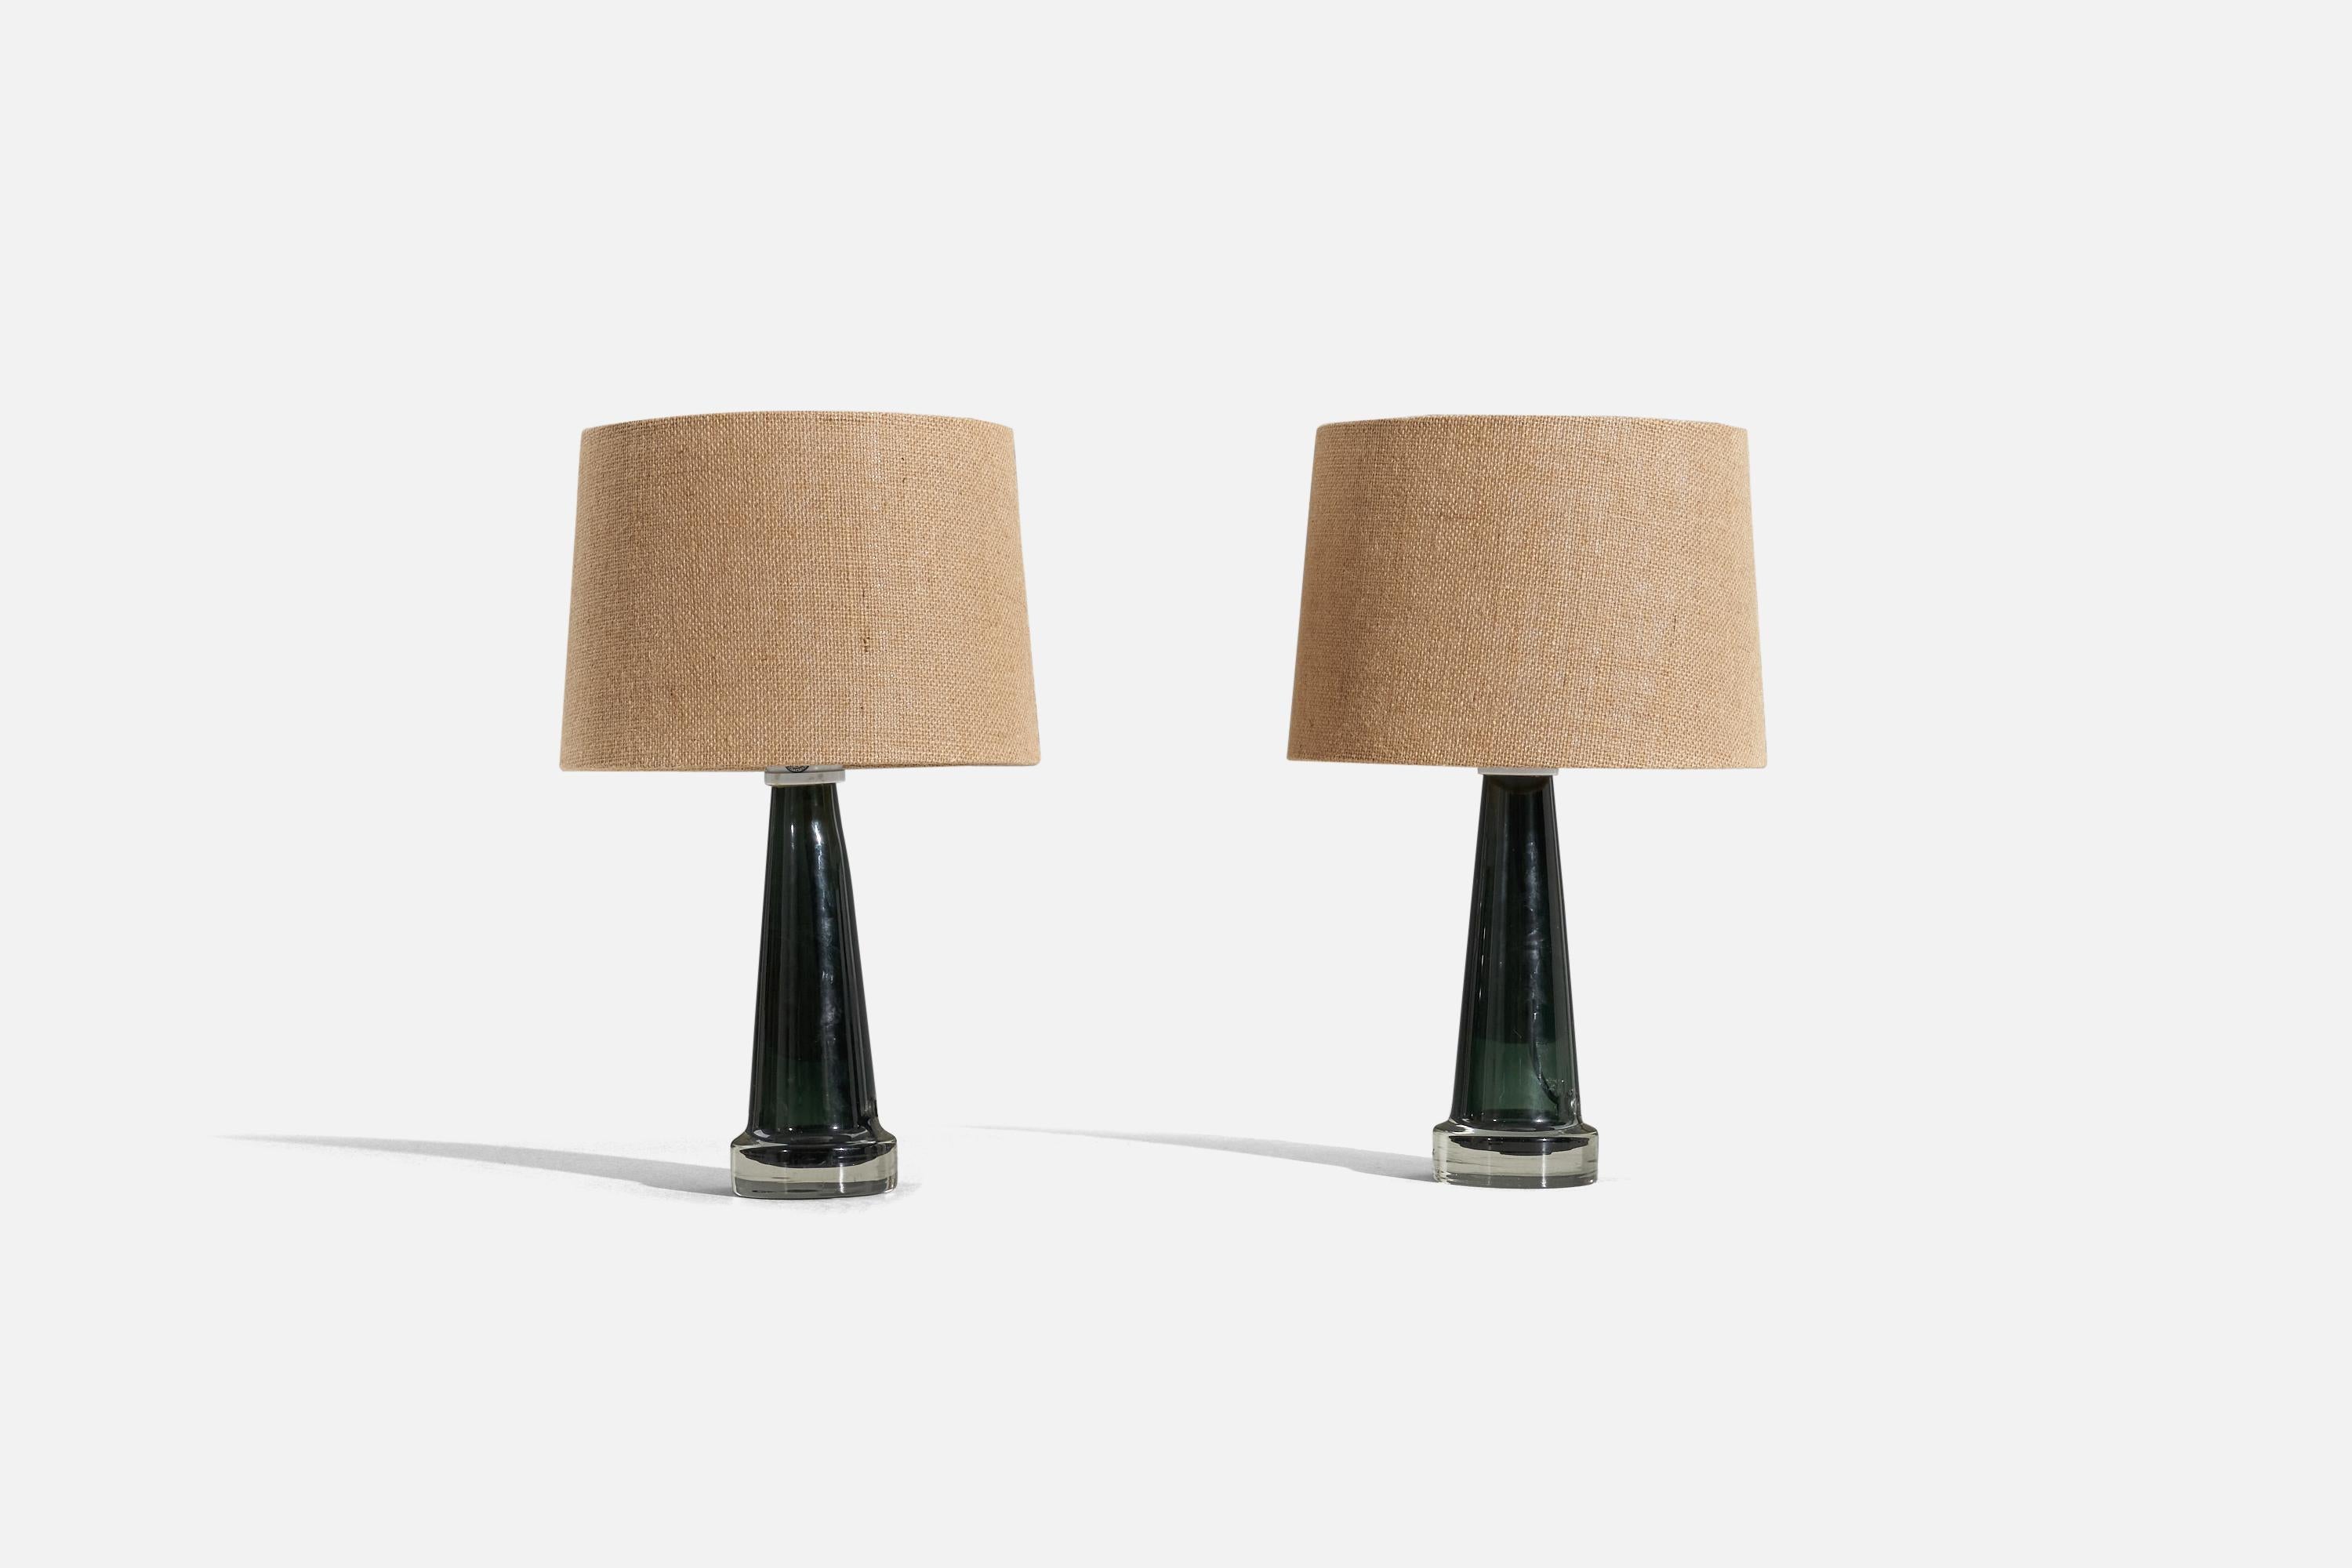 A pair of green glass table lamps, designed and produced by Trema, Småland, Sweden, c. 1950s.

Sold without lampshade. 
Dimensions of Lamp (inches) : 11.25 x 3.5 x 3.5 (H x W x D)
Dimensions of Shade (inches) : 7.1875 x 10 x 10 (T x B x S)
Dimension